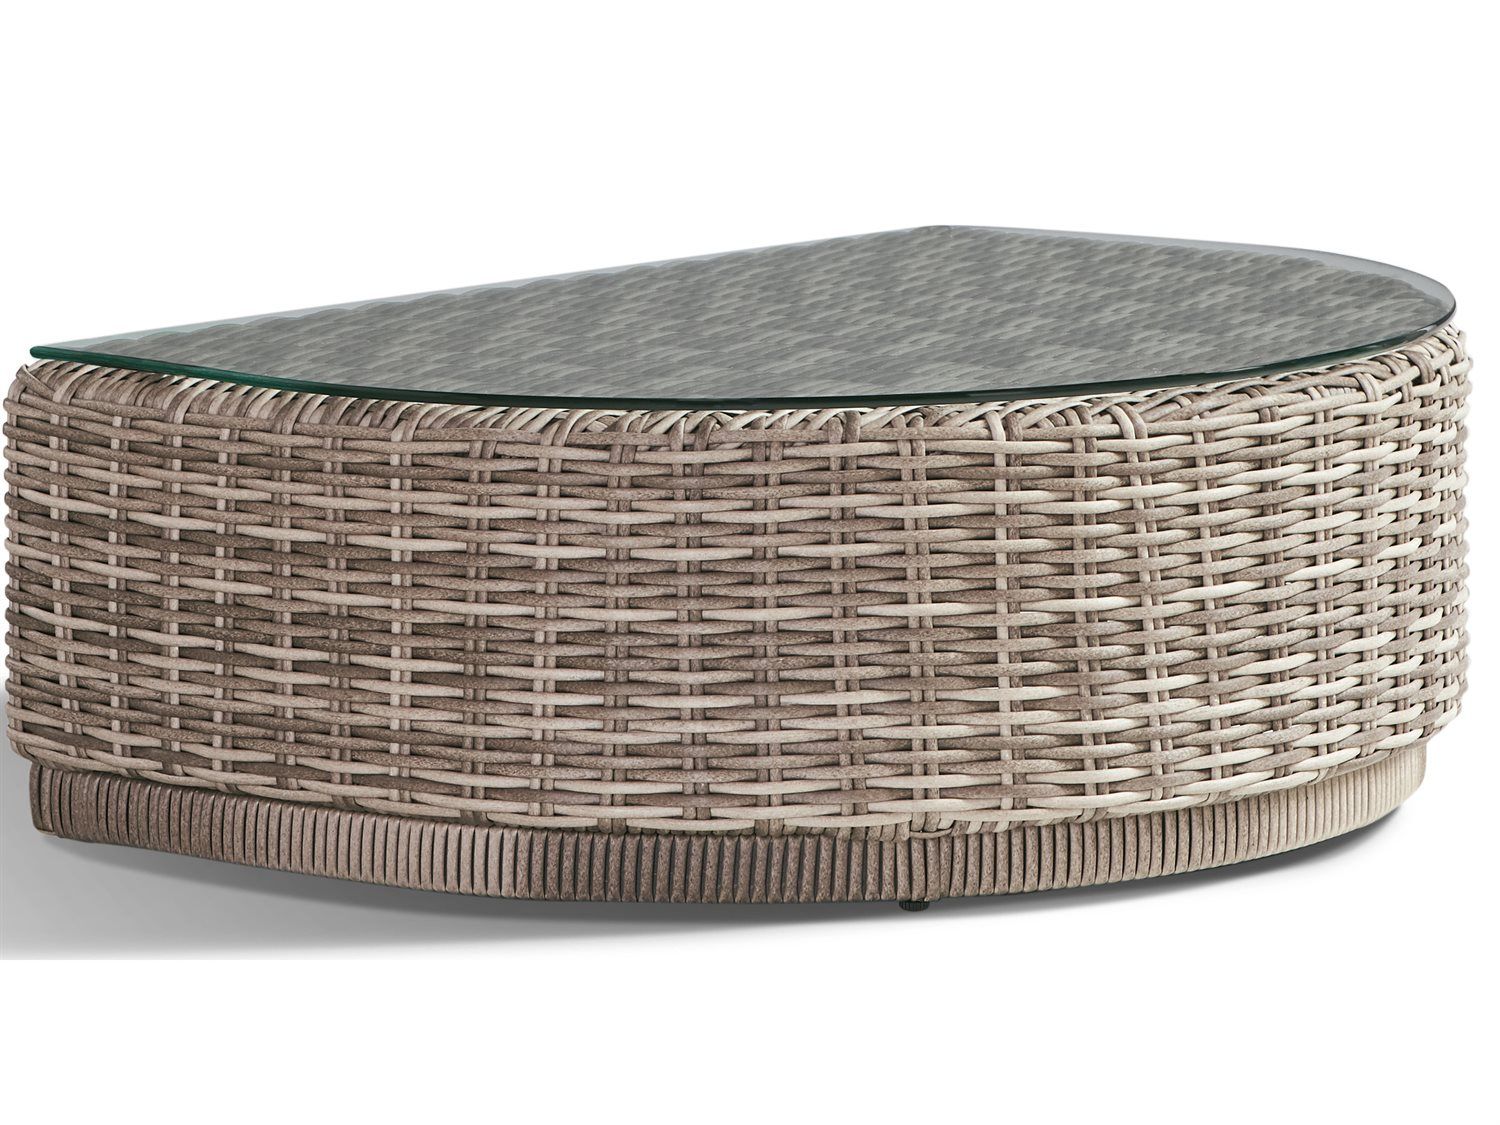 South Sea Rattan Luna Cove Wicker 35'' Half Round Glass Top Coffee Table |  Sr74344 Intended For Outdoor Half Round Coffee Tables (View 3 of 15)